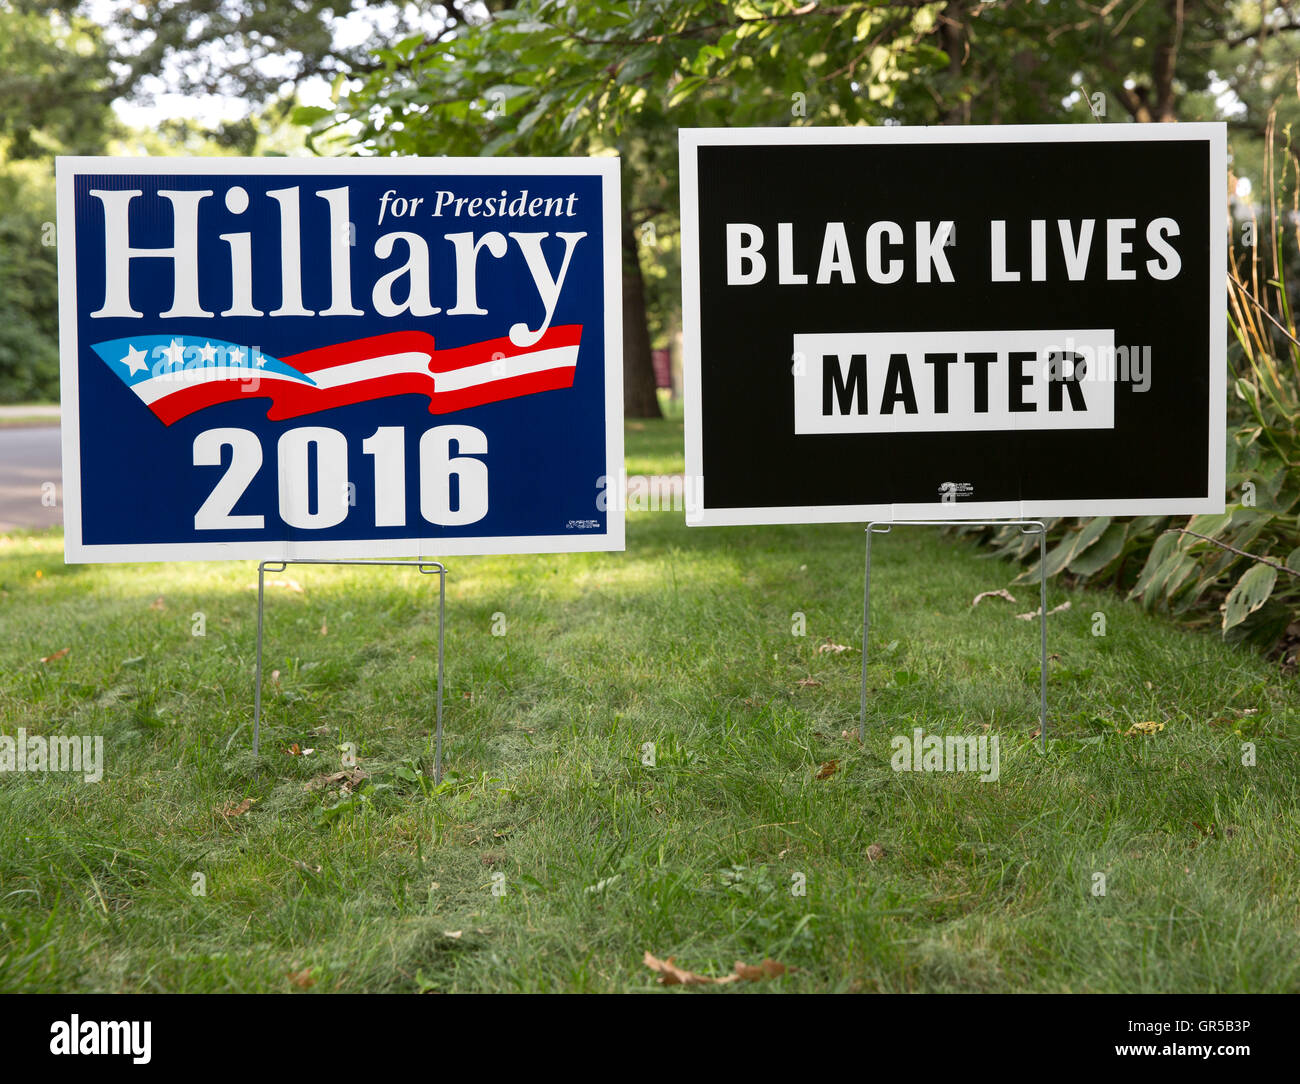 2016 Hillary Clinton for US president and BLACK LIVES MATTER yard signs Stock Photo